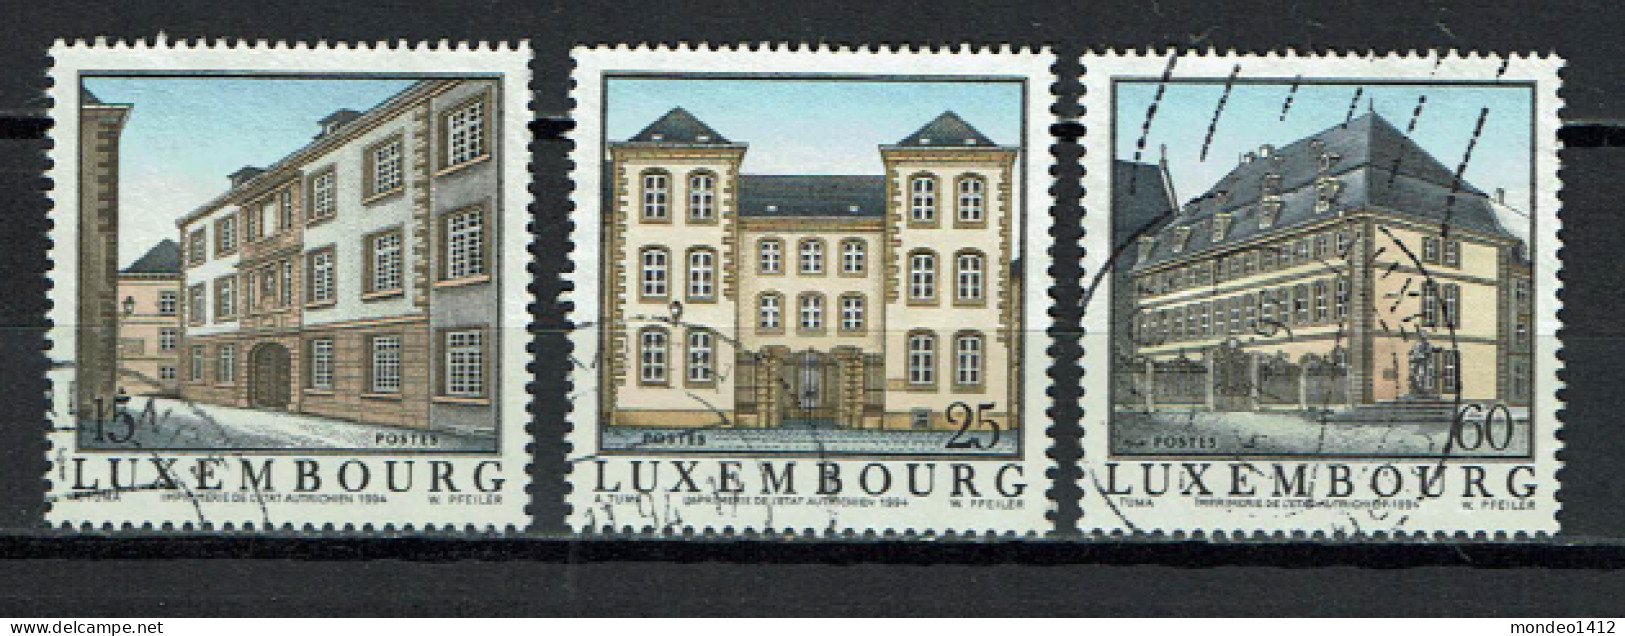 Luxembourg 1994 - YT 1300/1302 - Former Refugees In Luxembourg, Anciens Refuges - Usati